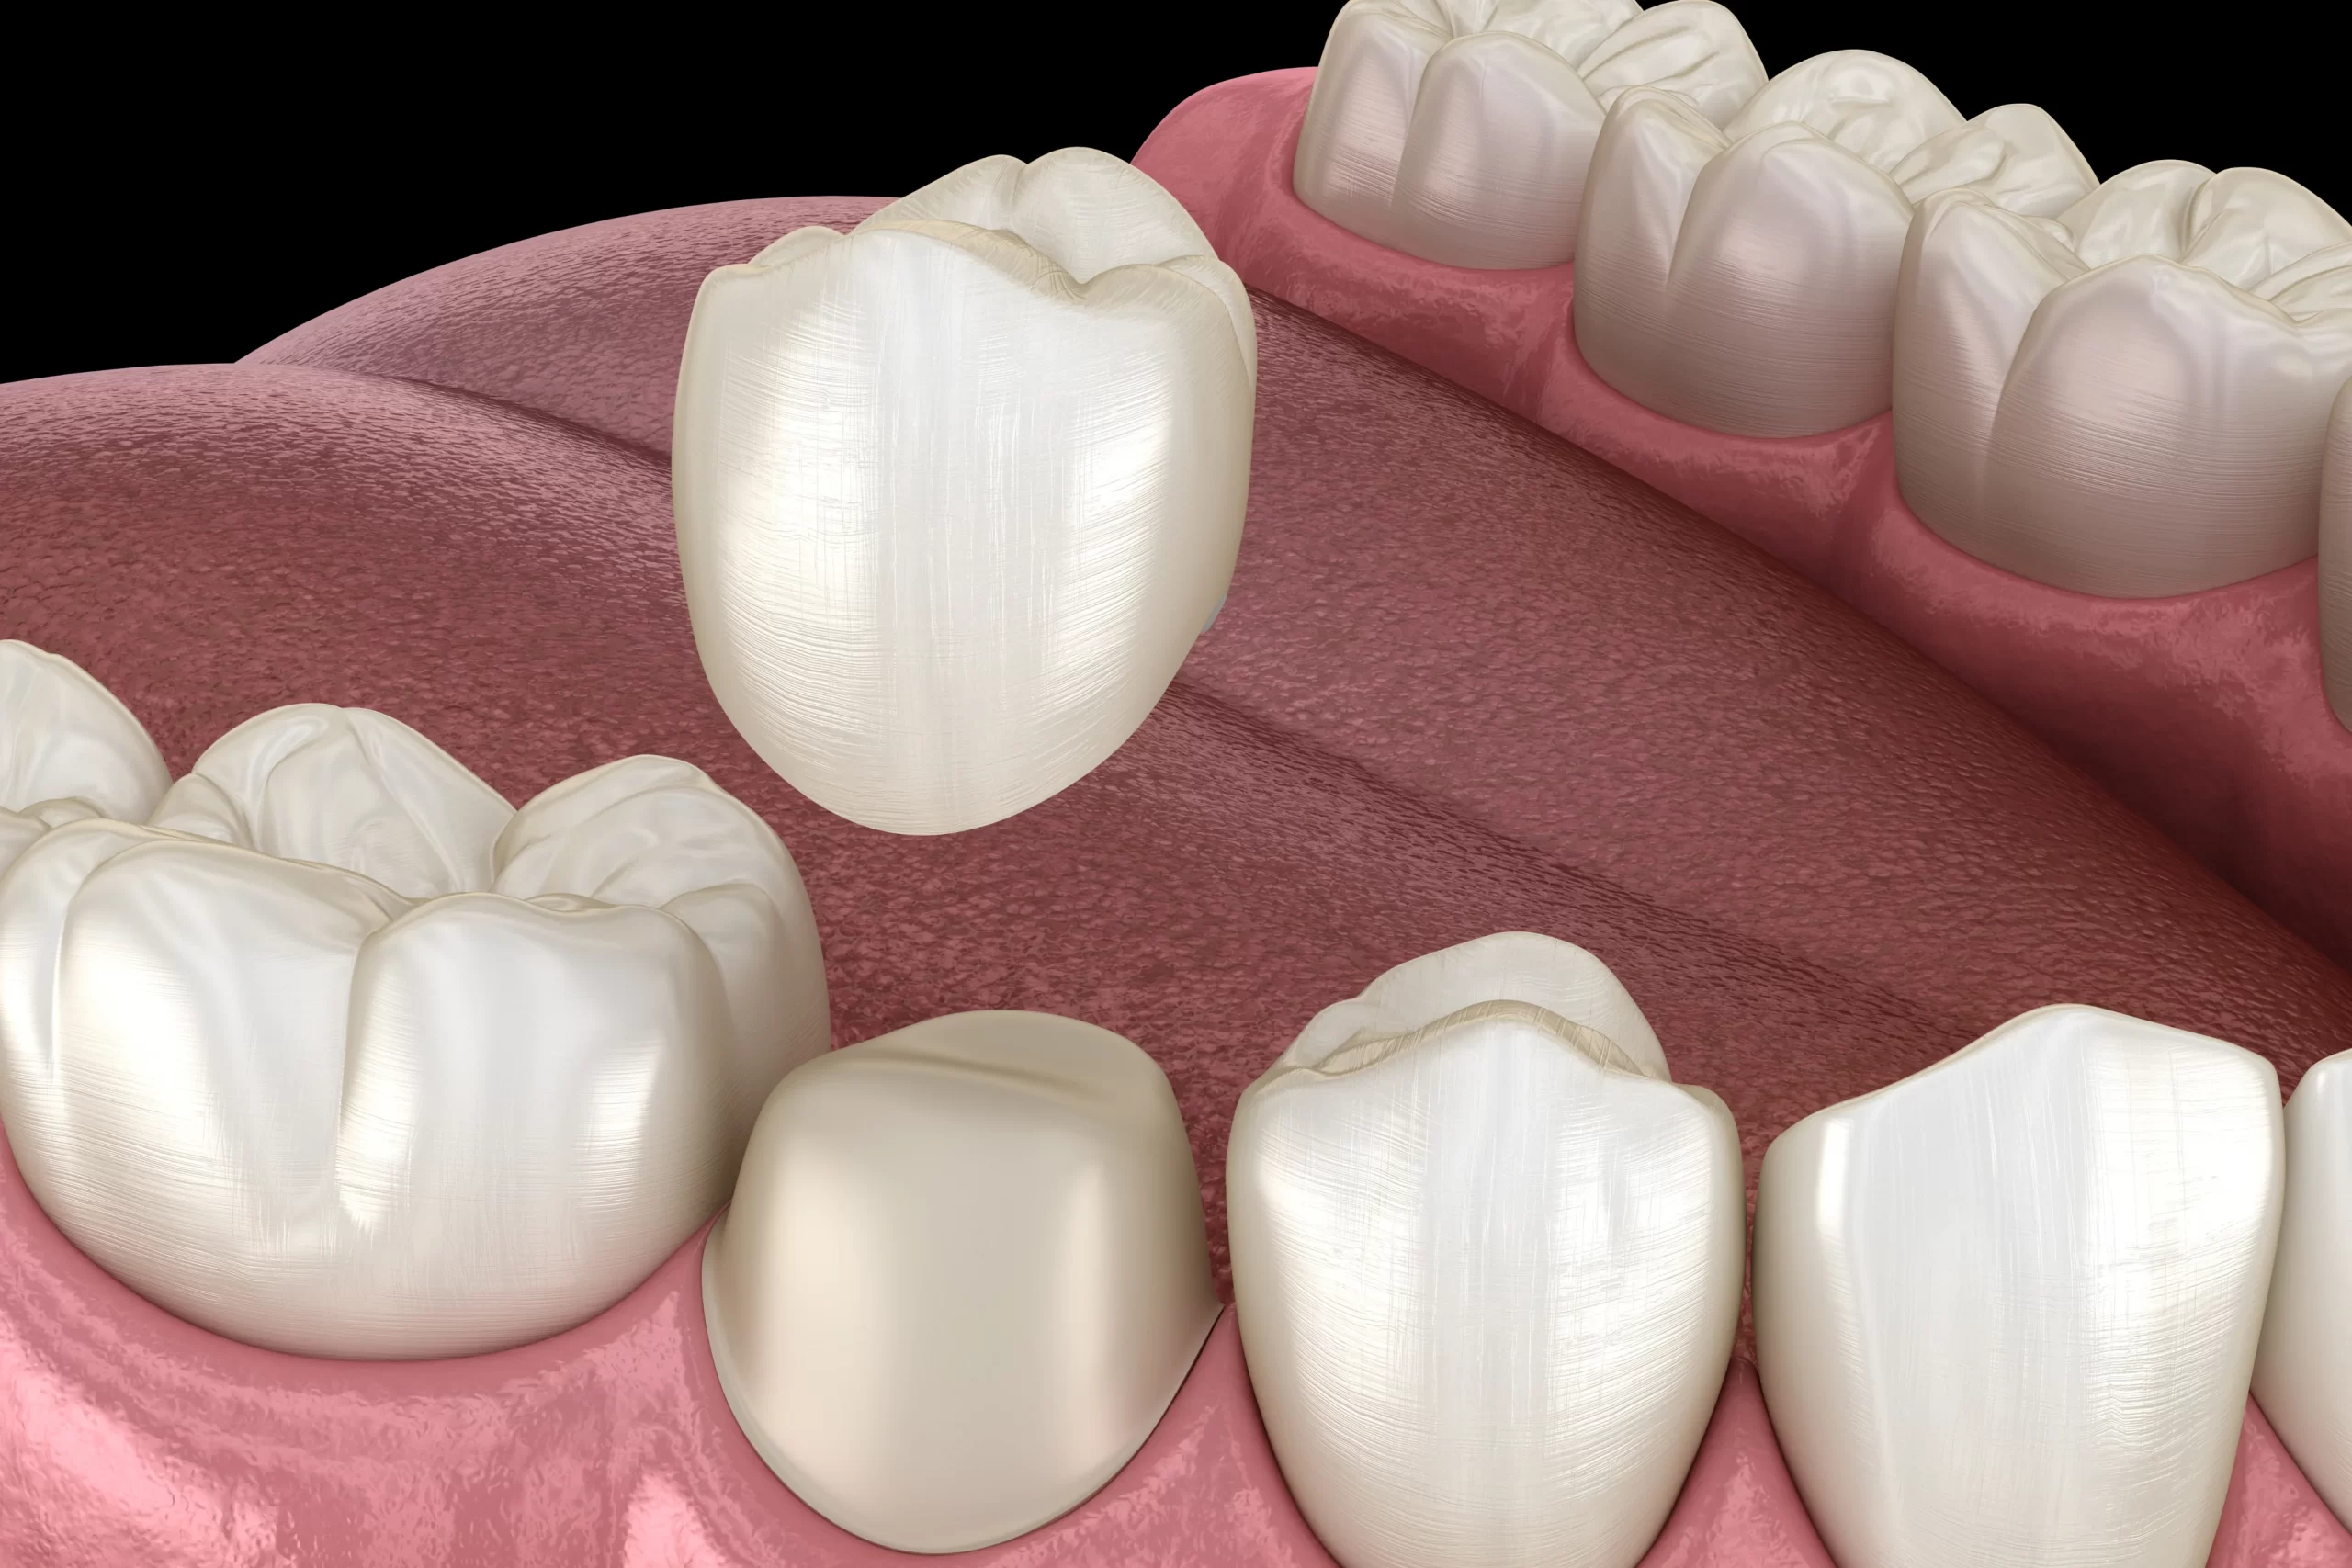 The Dental Crown Broke: What to Do?